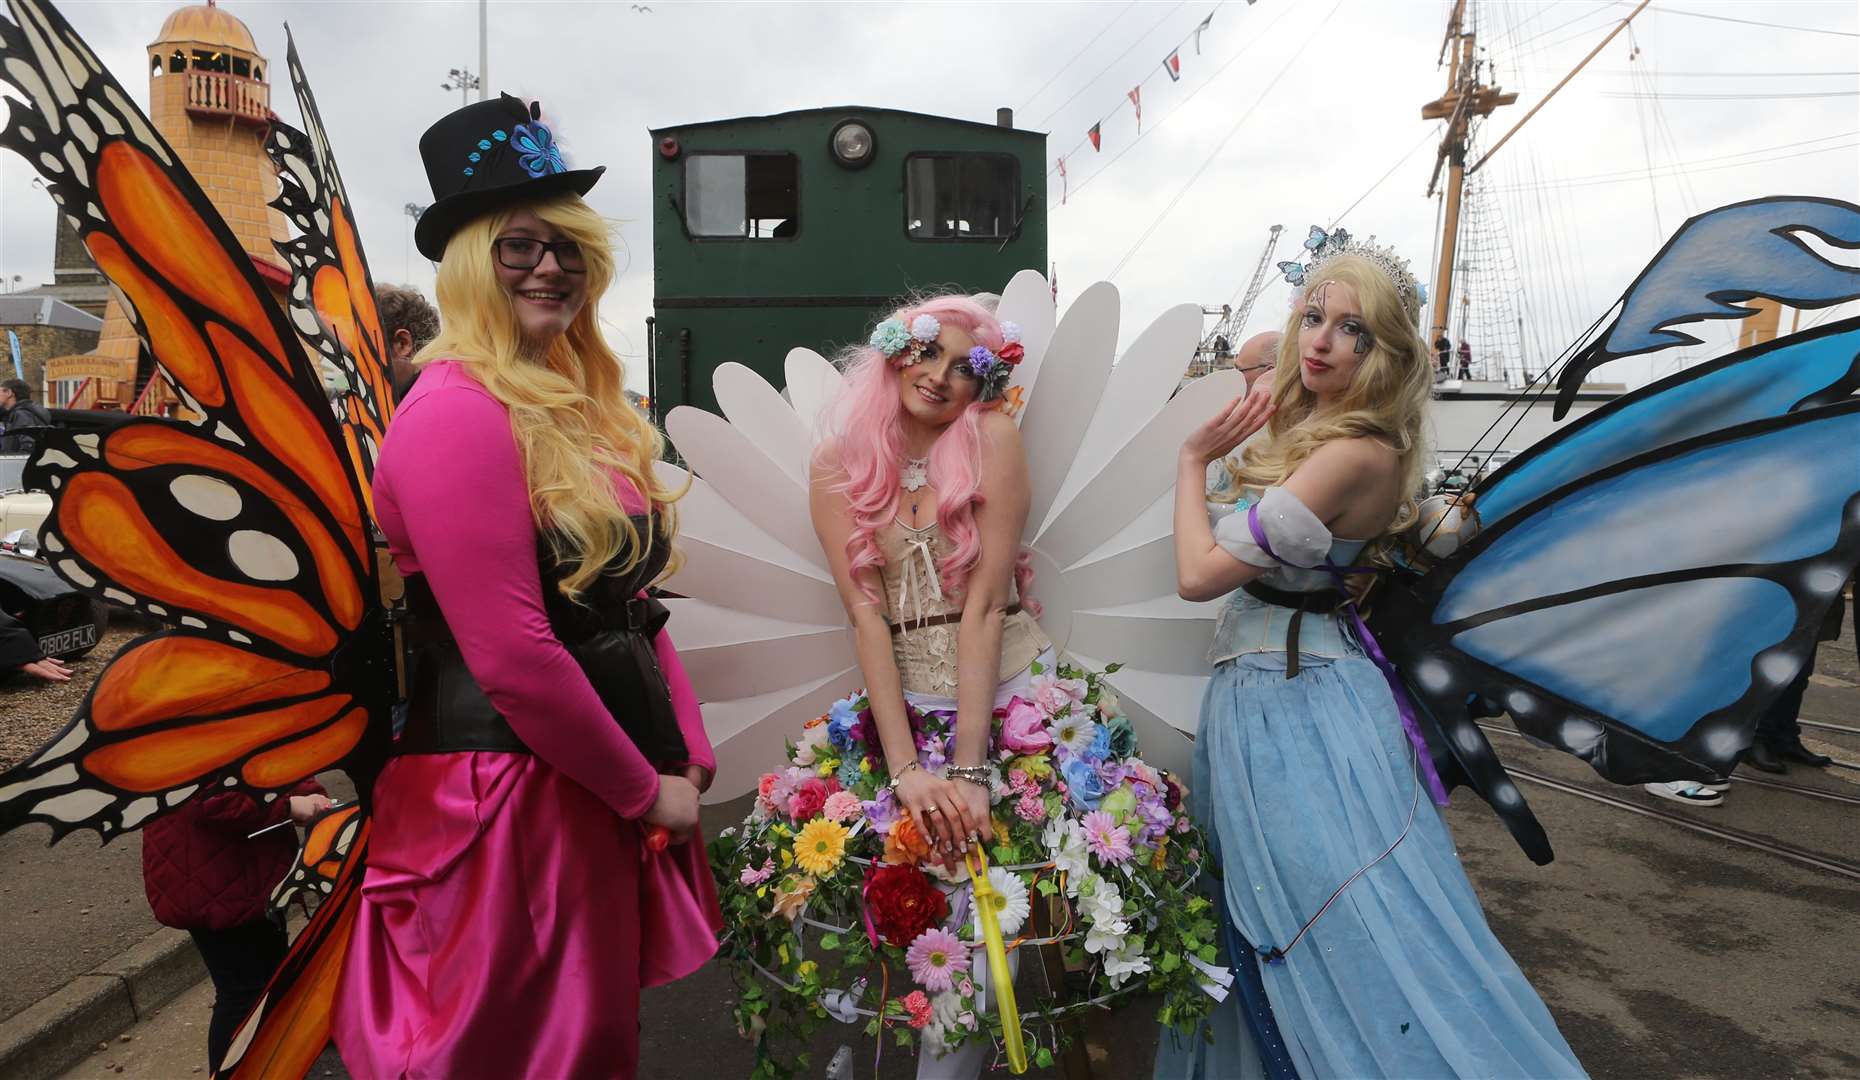 The Star Cross Fairies at the Festival of Steam at Chatham Dockyard. Picture by: John Westhrop